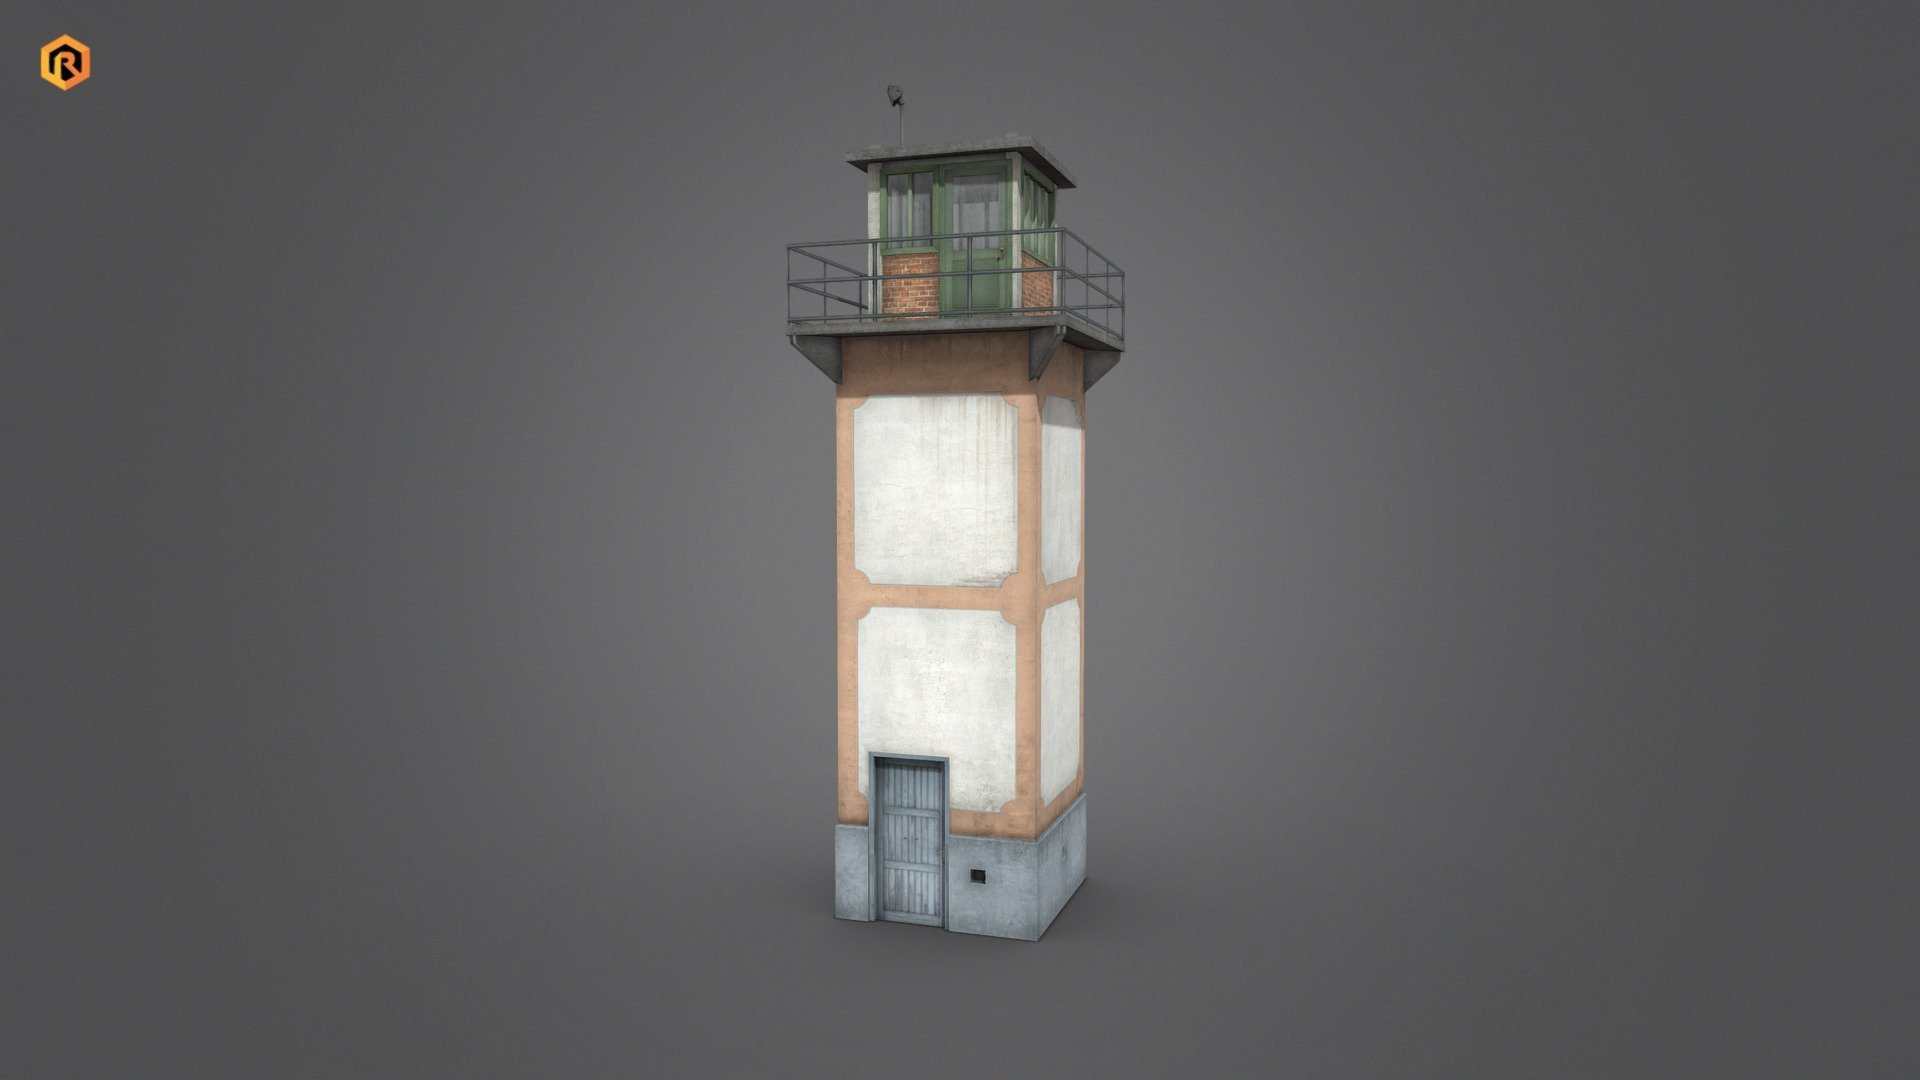 Low-poly 3D model of Guard Tower. The top interior part is also modeled but with less detail. 

This model is best for use in games and other VR/AR, real-time applications such as Unity or Unreal Engine.

It can also be rendered in Blender (ex Cycles) or Vray as the model is equipped with all required textures. 

Technical details:




2048 x 2048 Diffuse and AO textures

711 Triangles

369 Polygons

503 Vertices

Model is one mesh.

Lot of additional file formats included (Blender, Unity, Maya etc.)  

More file formats are available in additional zip file on product page (See all files)

Please feel free to contact me if you have any questions or need any support for this asset.

Support e-mail: support@rescue3d.com - Guard Tower - Buy Royalty Free 3D model by Rescue3D Assets (@rescue3d) 3d model